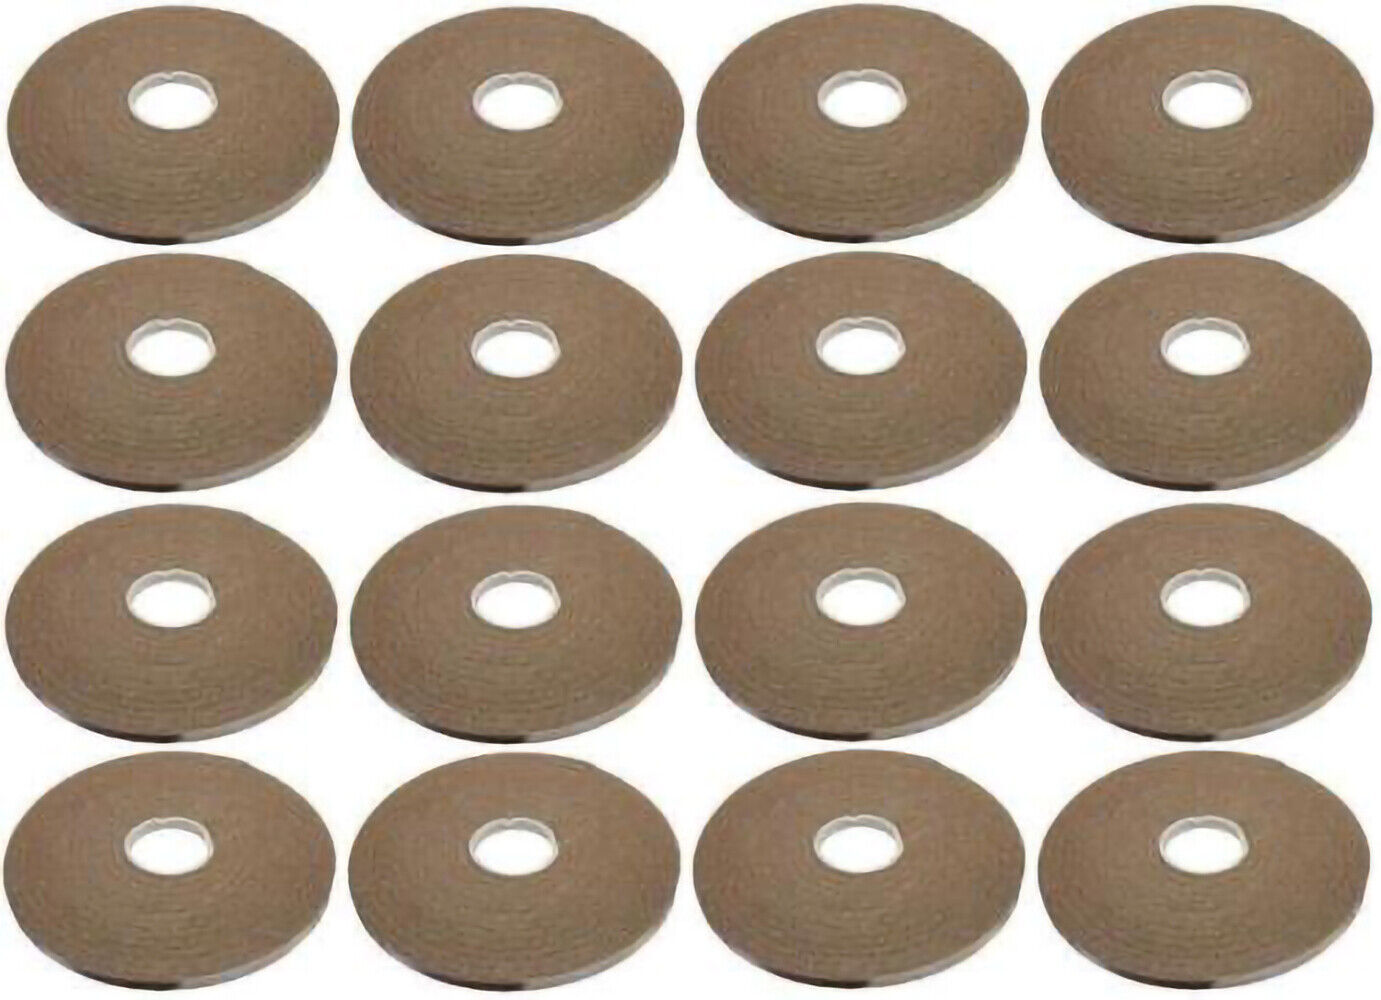 16 x 5m Self Adhesive Roll Sheet Tape Super Sticky PU Gasket Seal 5mm Brown